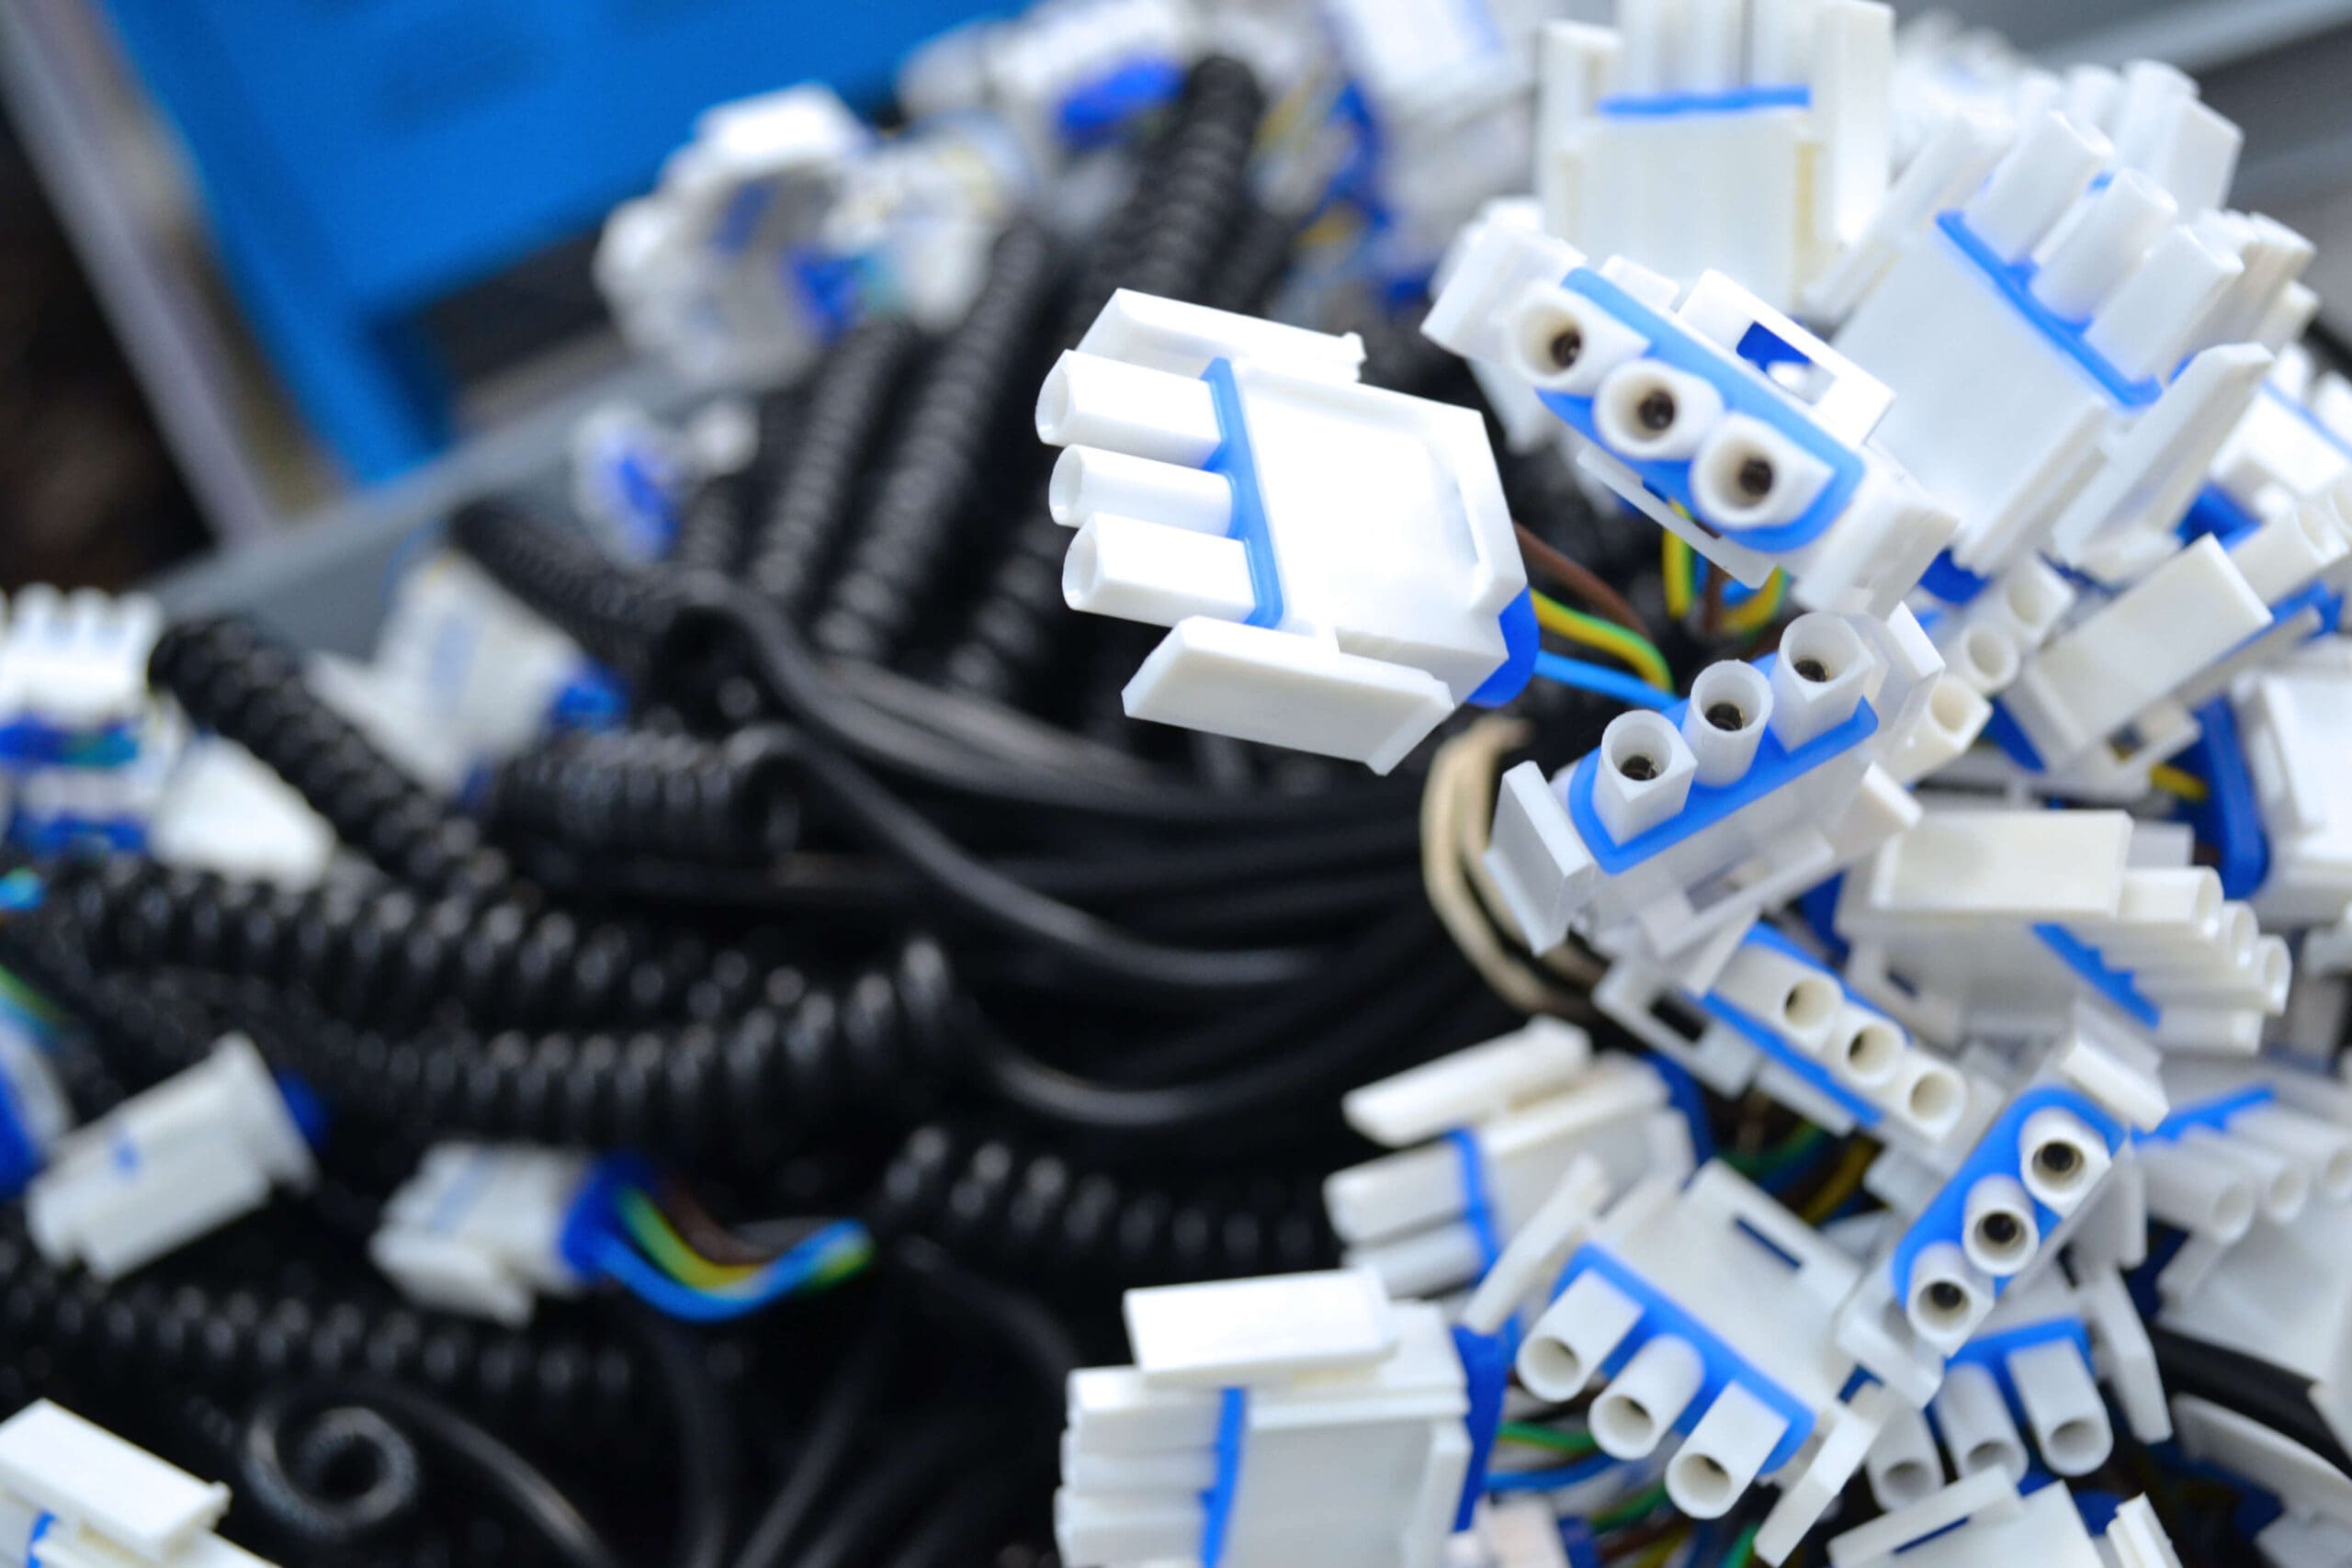 The image shows a large number of electrical connectors and coiled cables. The connectors are primarily white with blue accents, featuring multiple sockets, likely designed to accommodate spade or similar connectors. The black coiled cables suggest flexibility and potential use in environments where length variability is an advantage, like in telephone handsets or other electronic devices that require movement. The background is blurred with hints of blue, focusing the attention on the connectors in the foreground. The abundance and disarray of the connectors indicate a storage or supply setting, perhaps in an electronics workshop or manufacturing facility.